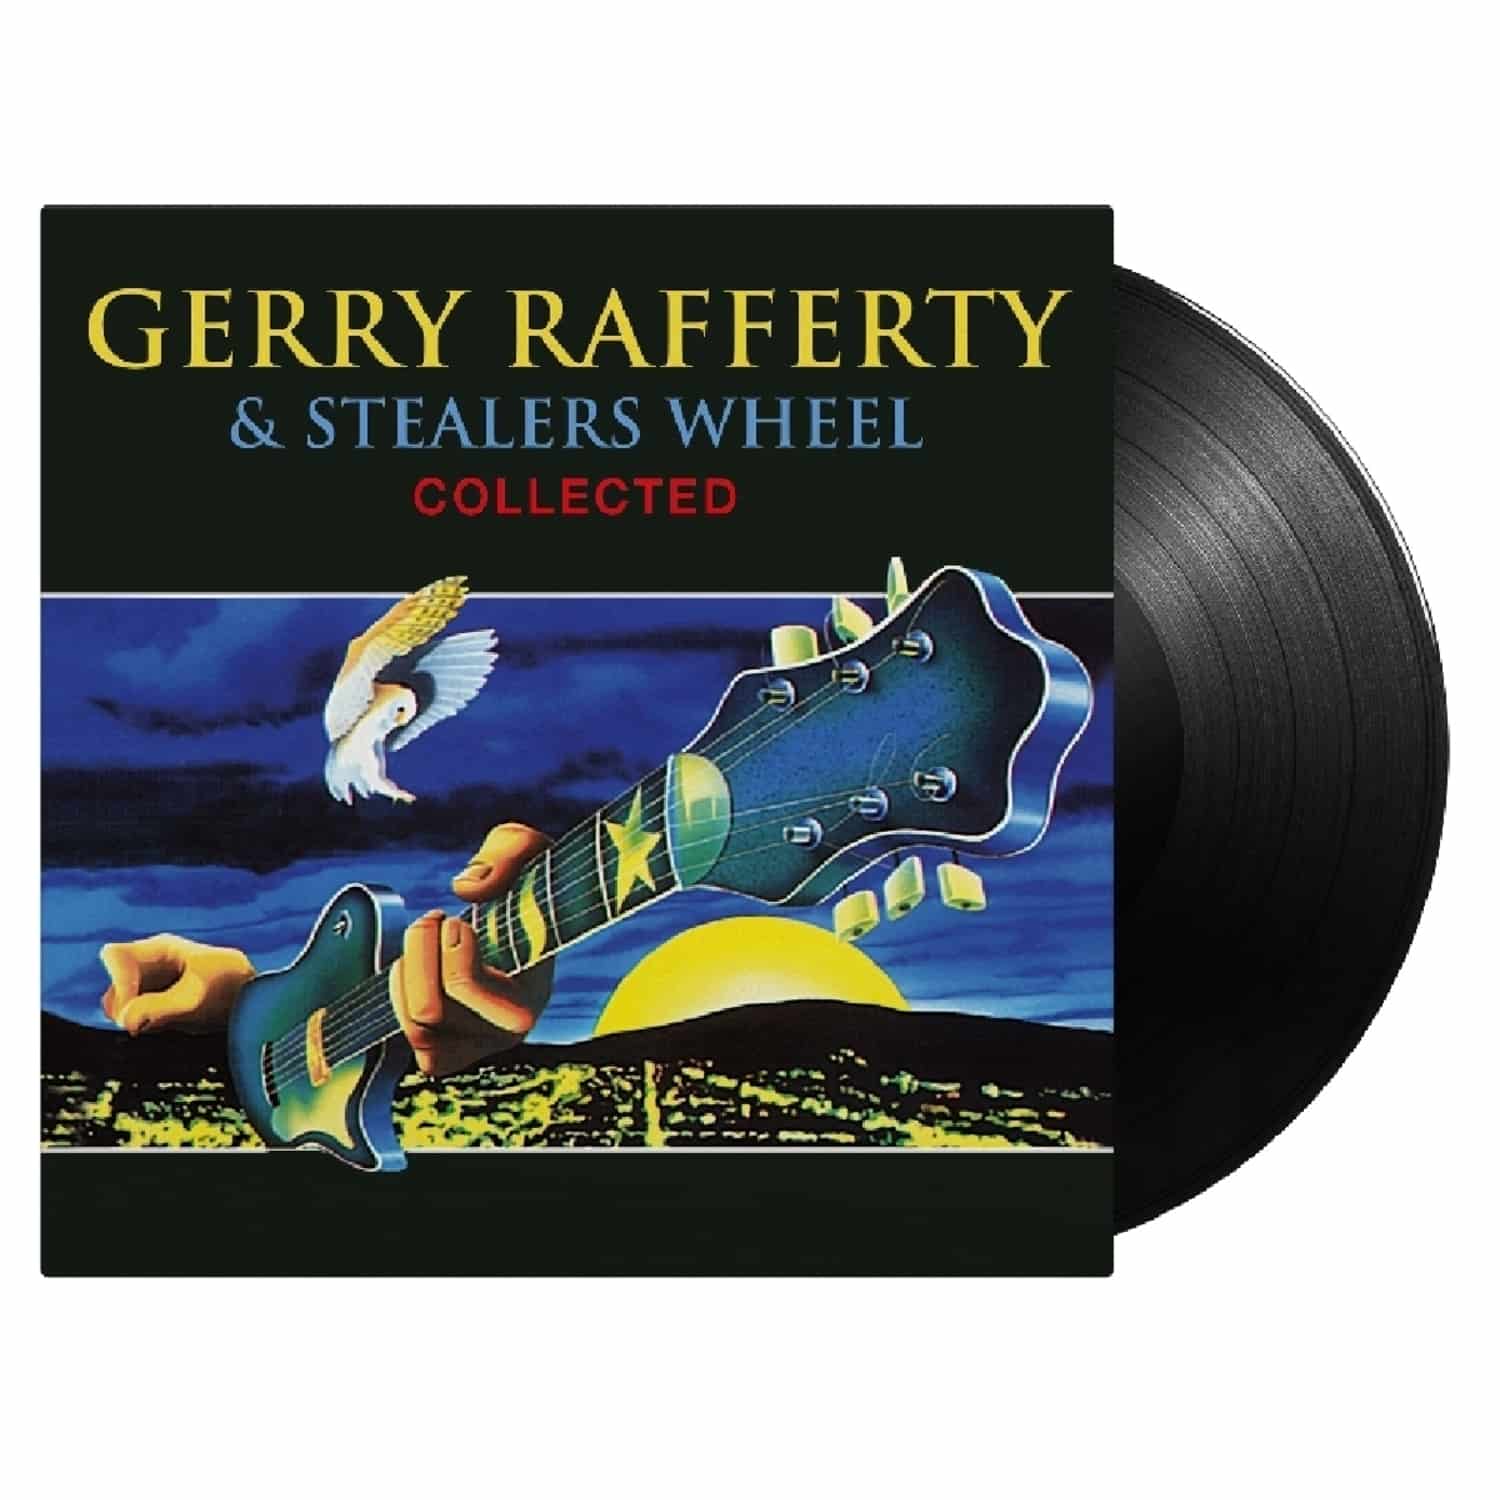 Gerry Rafferty & Stealers Wheel - COLLECTED 